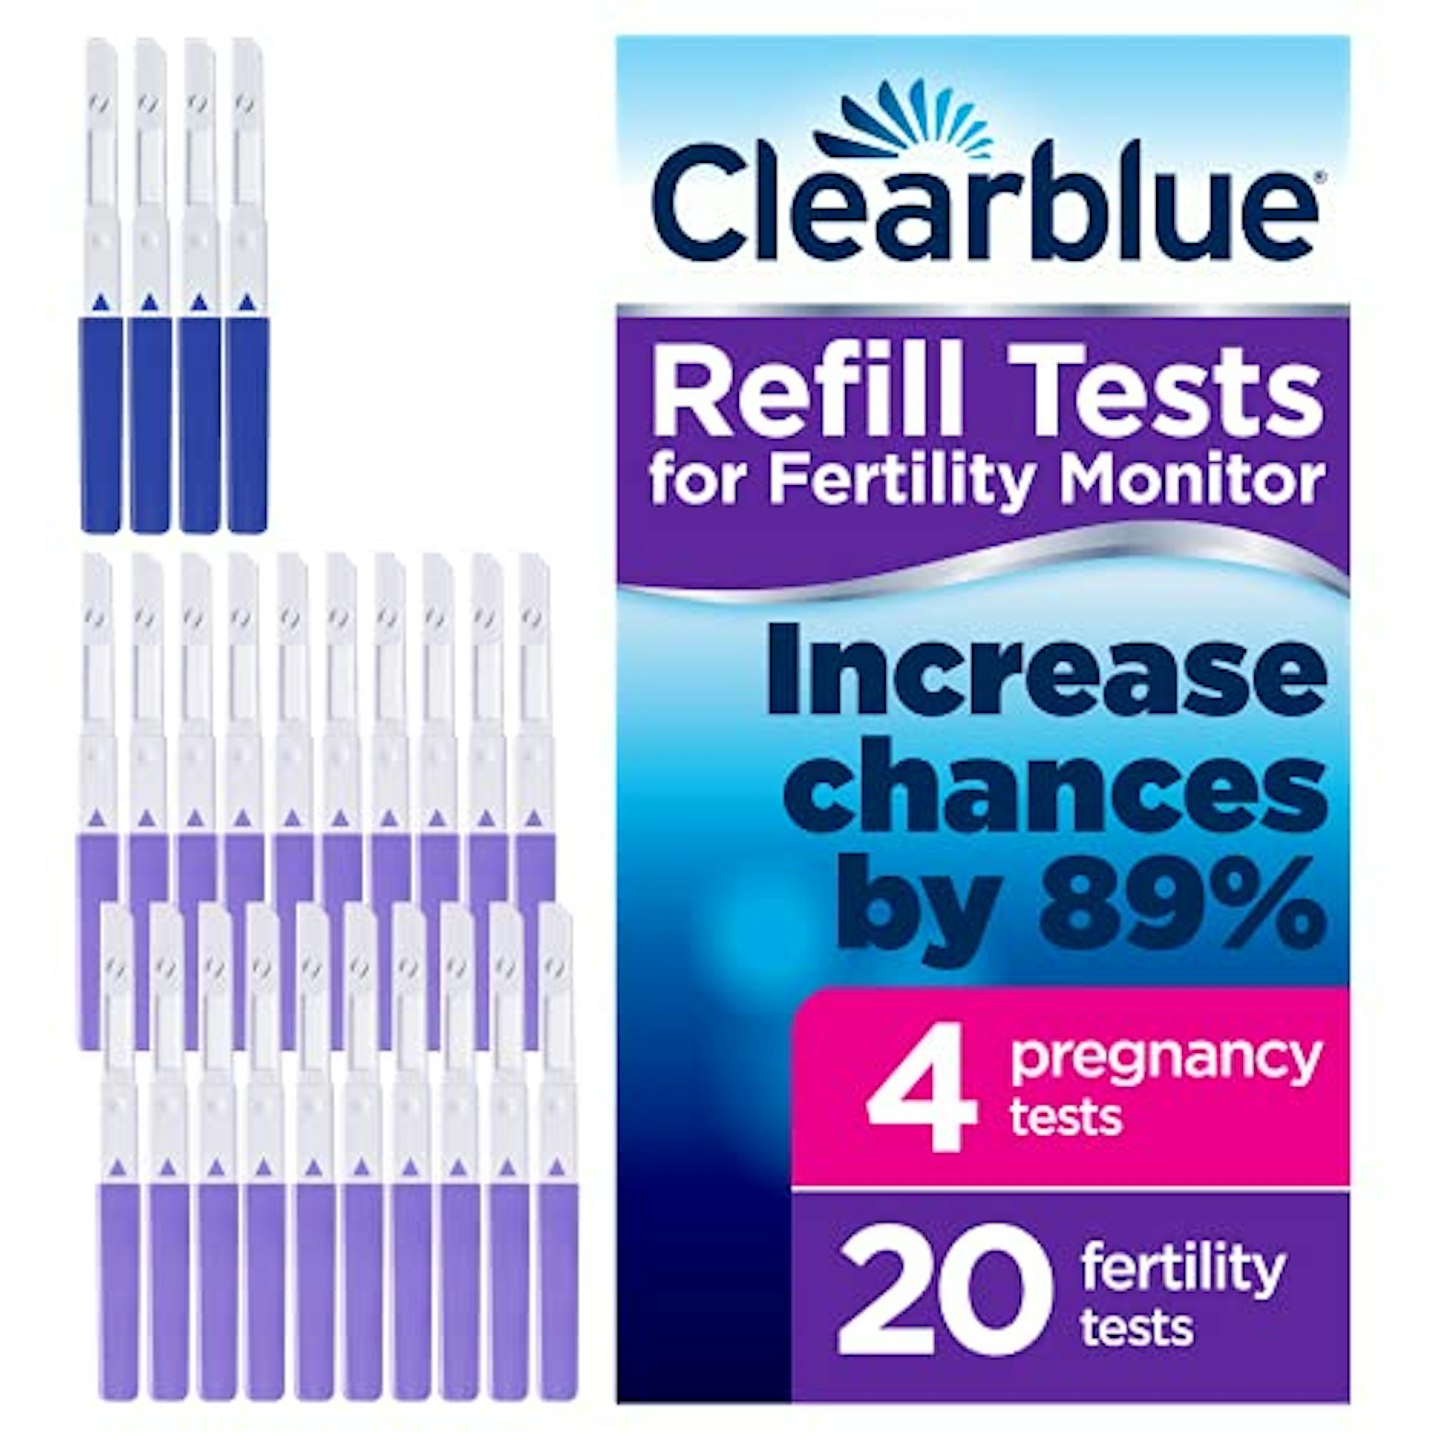 Clearblue Pack of 20 Refill Fertility Tests and 4 Pregnancy Tests